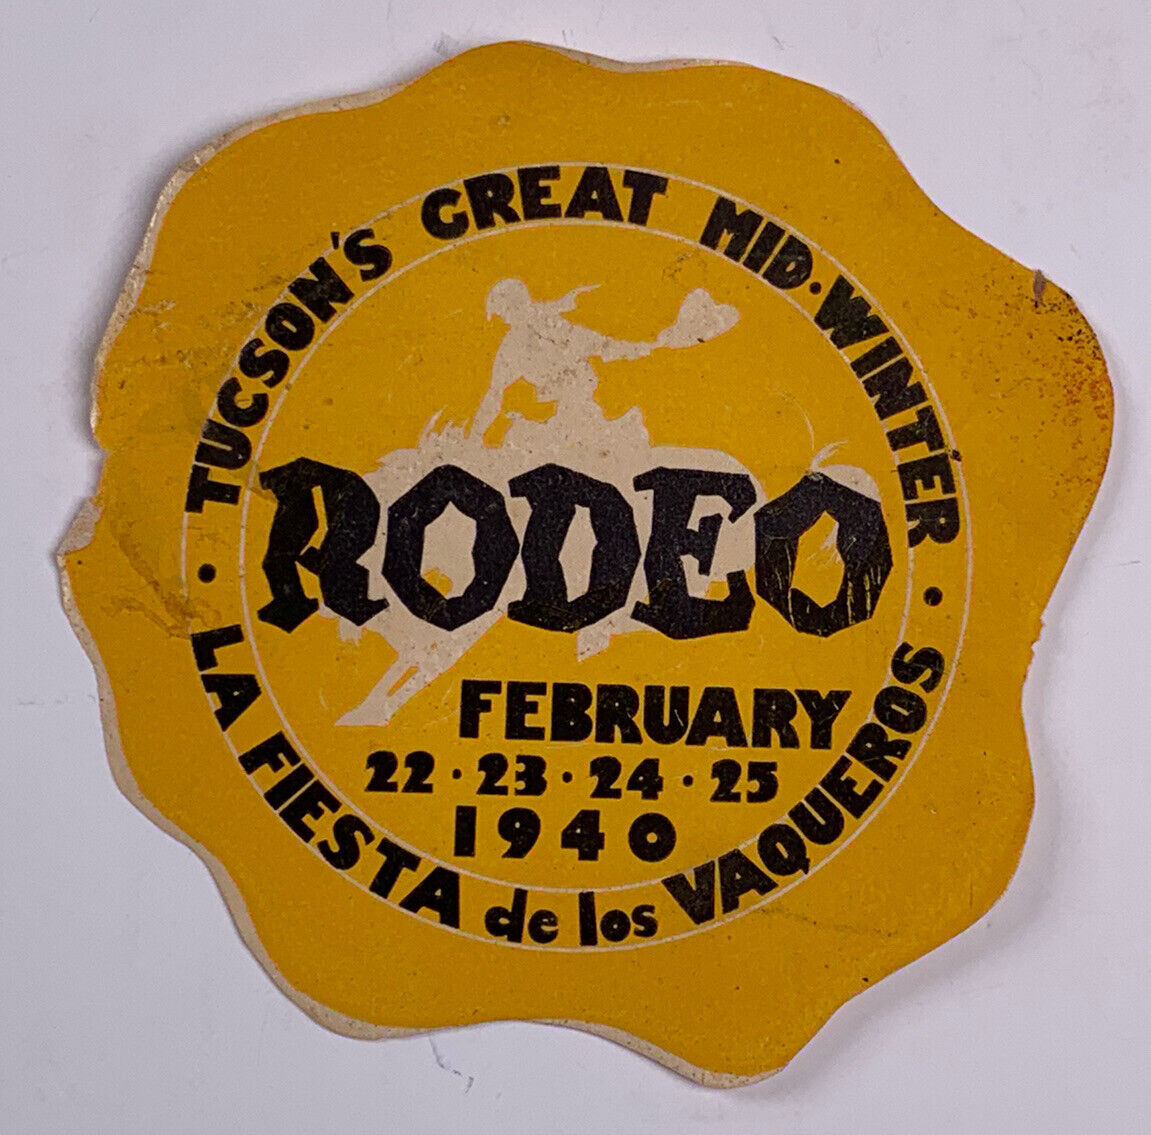 Vintage Label Tucson’s Great Mid Winter Rodeo